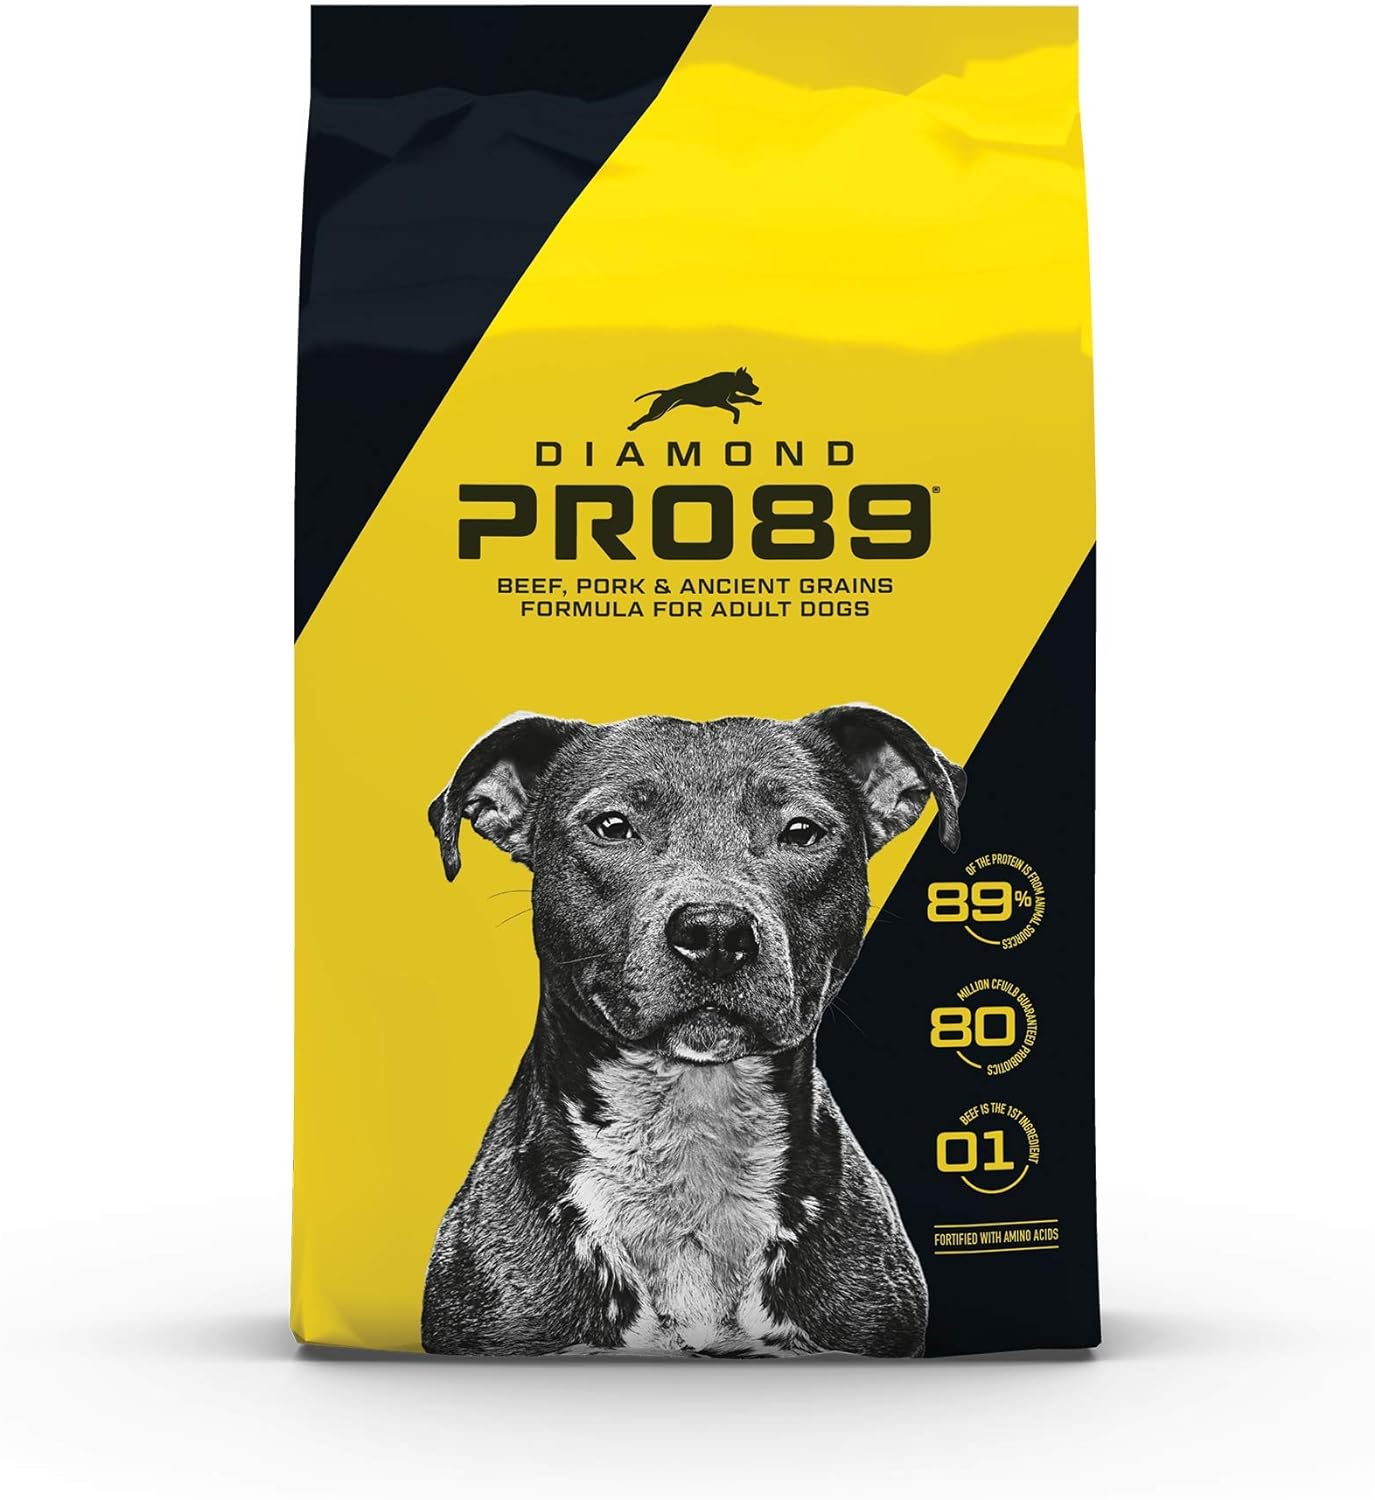 Diamond Pro89 Beef, Pork & Ancient Grains Formula for Adult Dogs Dry Dog Food – Gallery Image 1